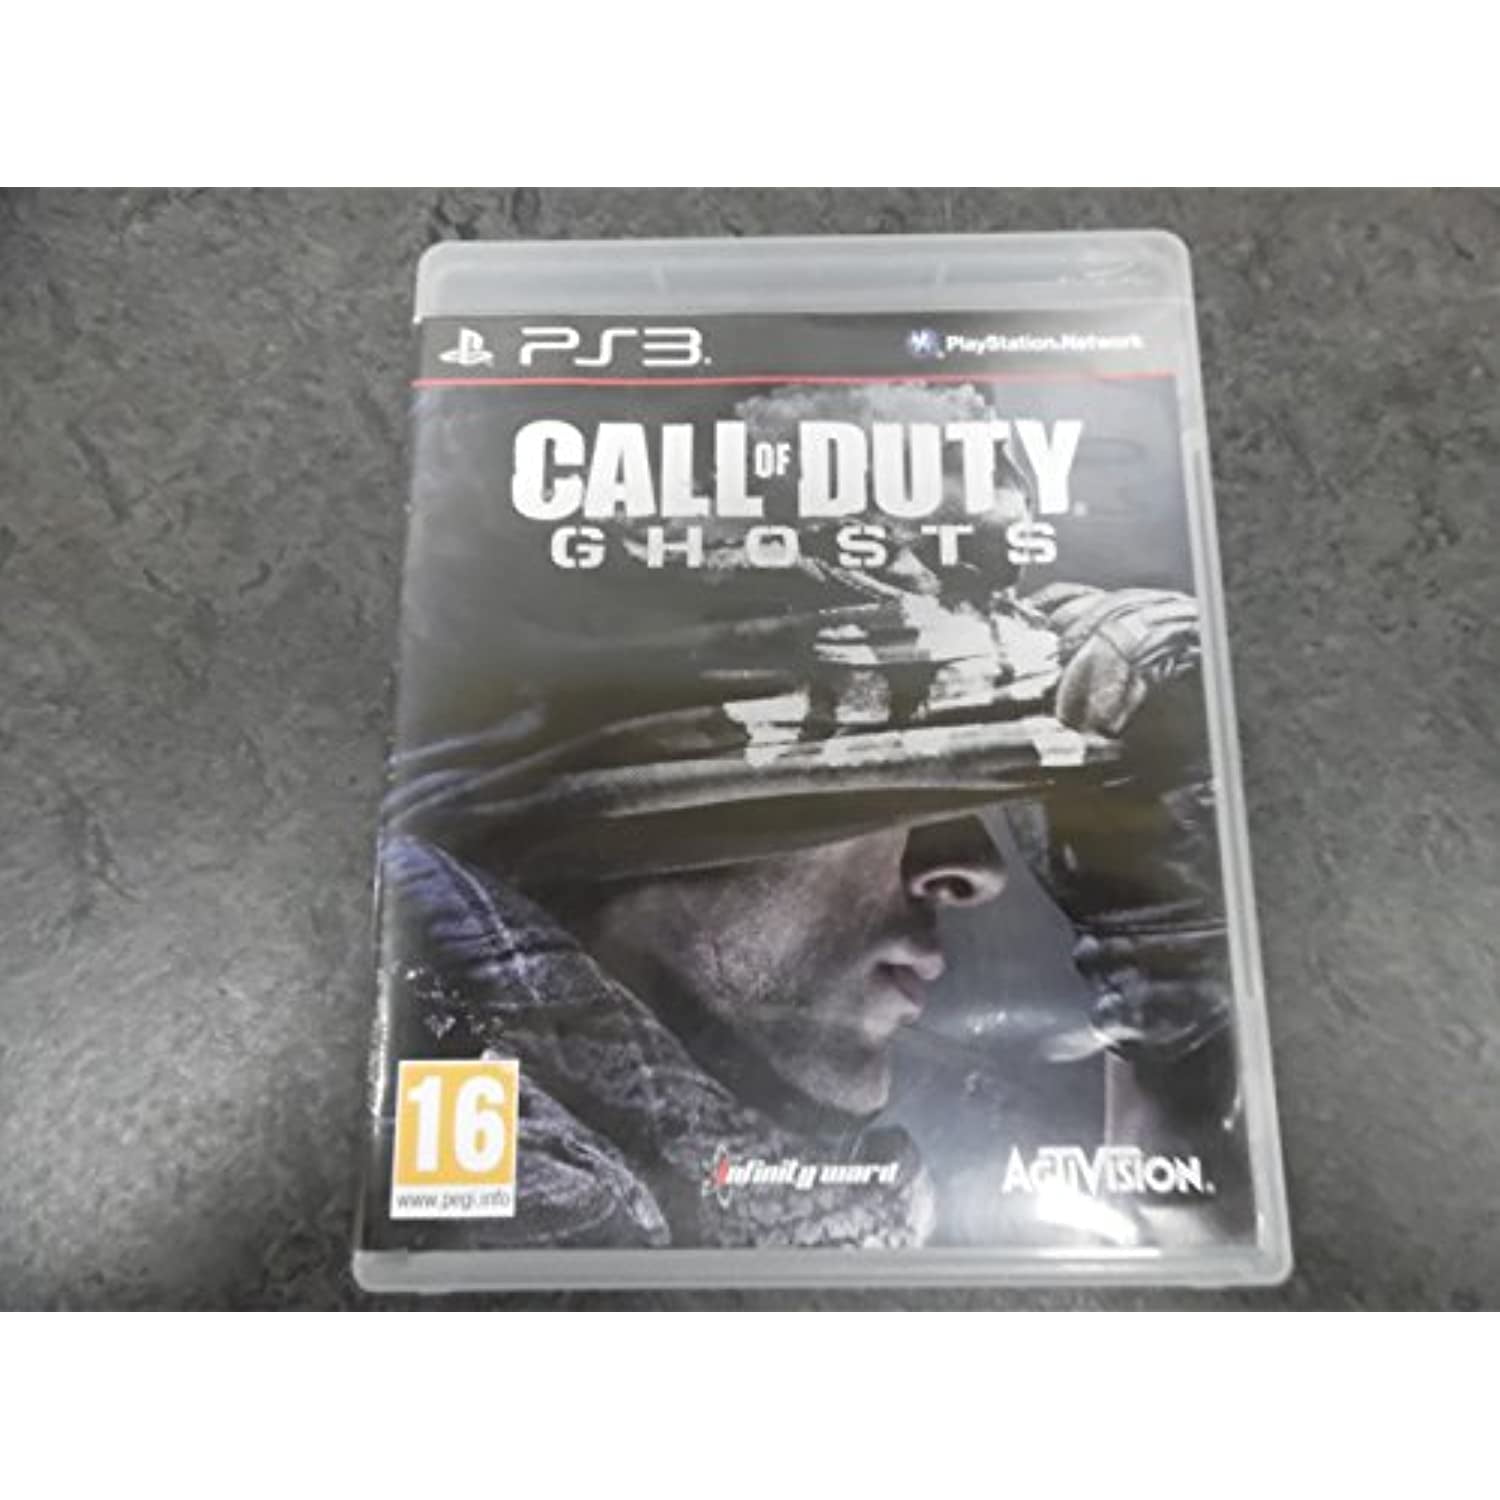 PS3 Game - Call of Duty Ghosts * PlayStation 3 Game - COD Ghosts